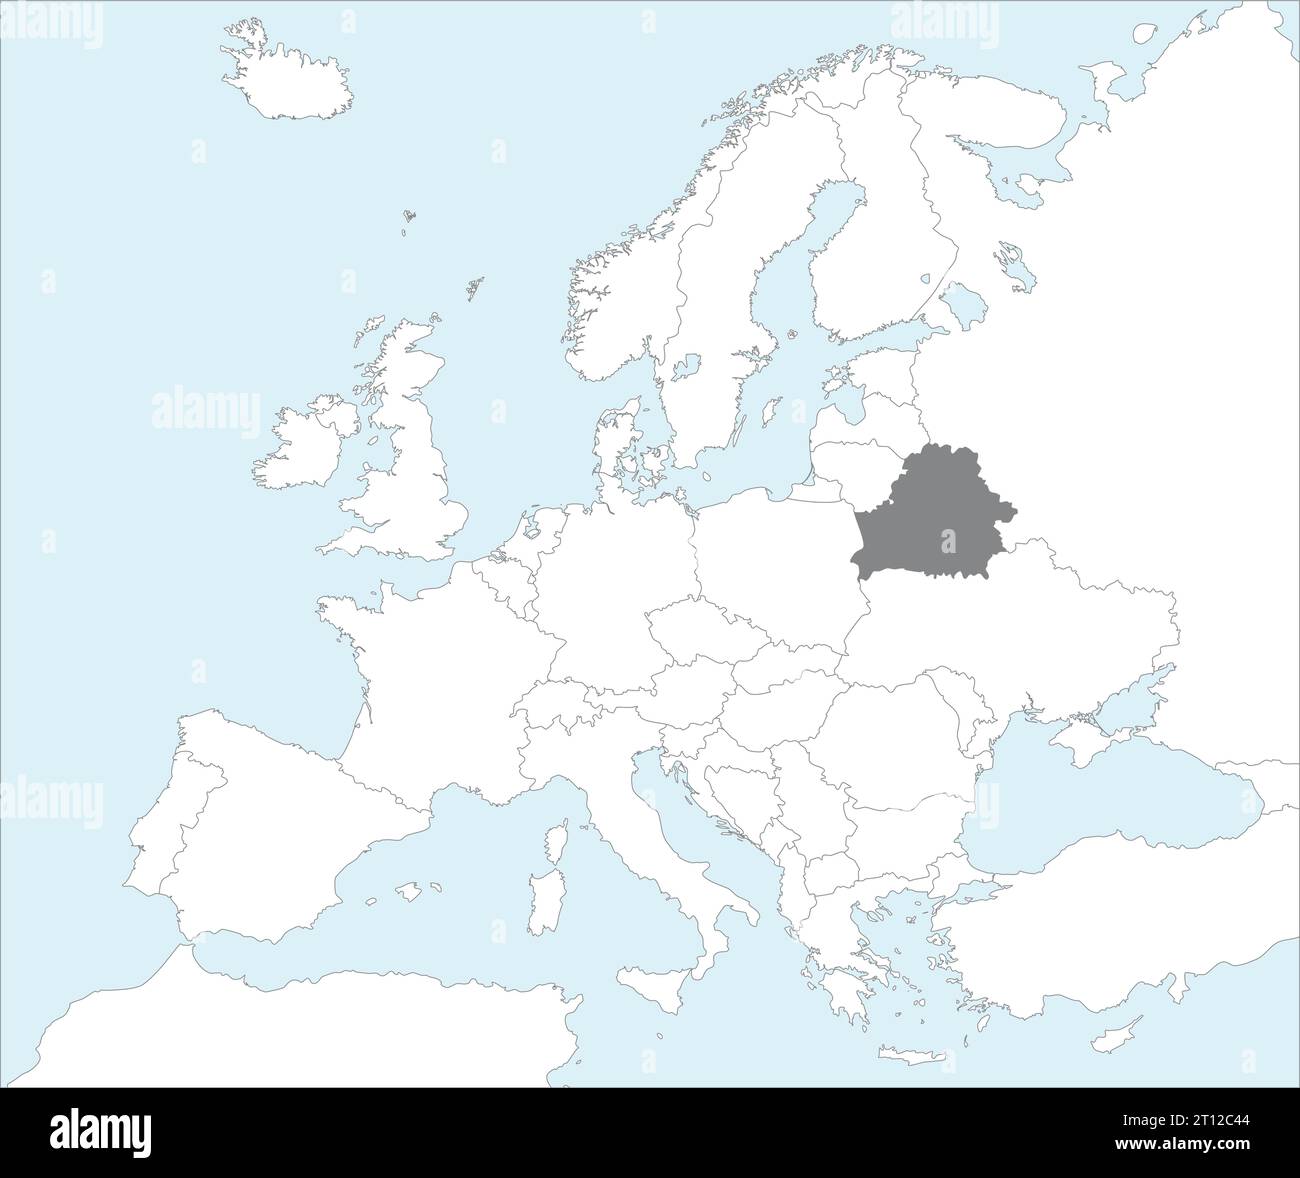 Location map of the REPUBLIC OF BELARUS, EUROPE Stock Vector